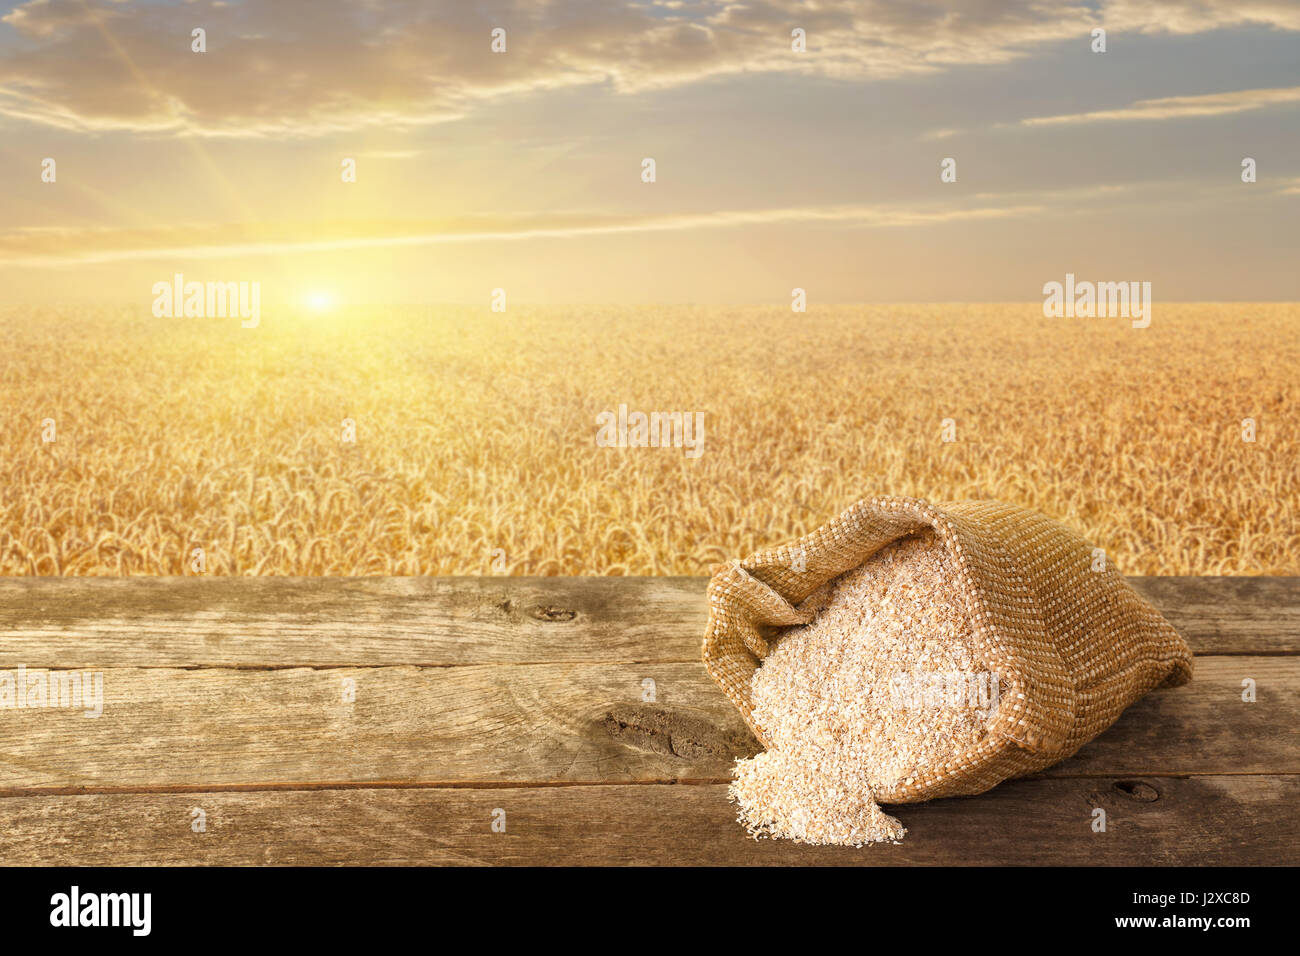 bran in sack on table with ripe cereal field on the background. Food supplement to improve digestion. Dietary fiber. Product for healthy nutrition and Stock Photo